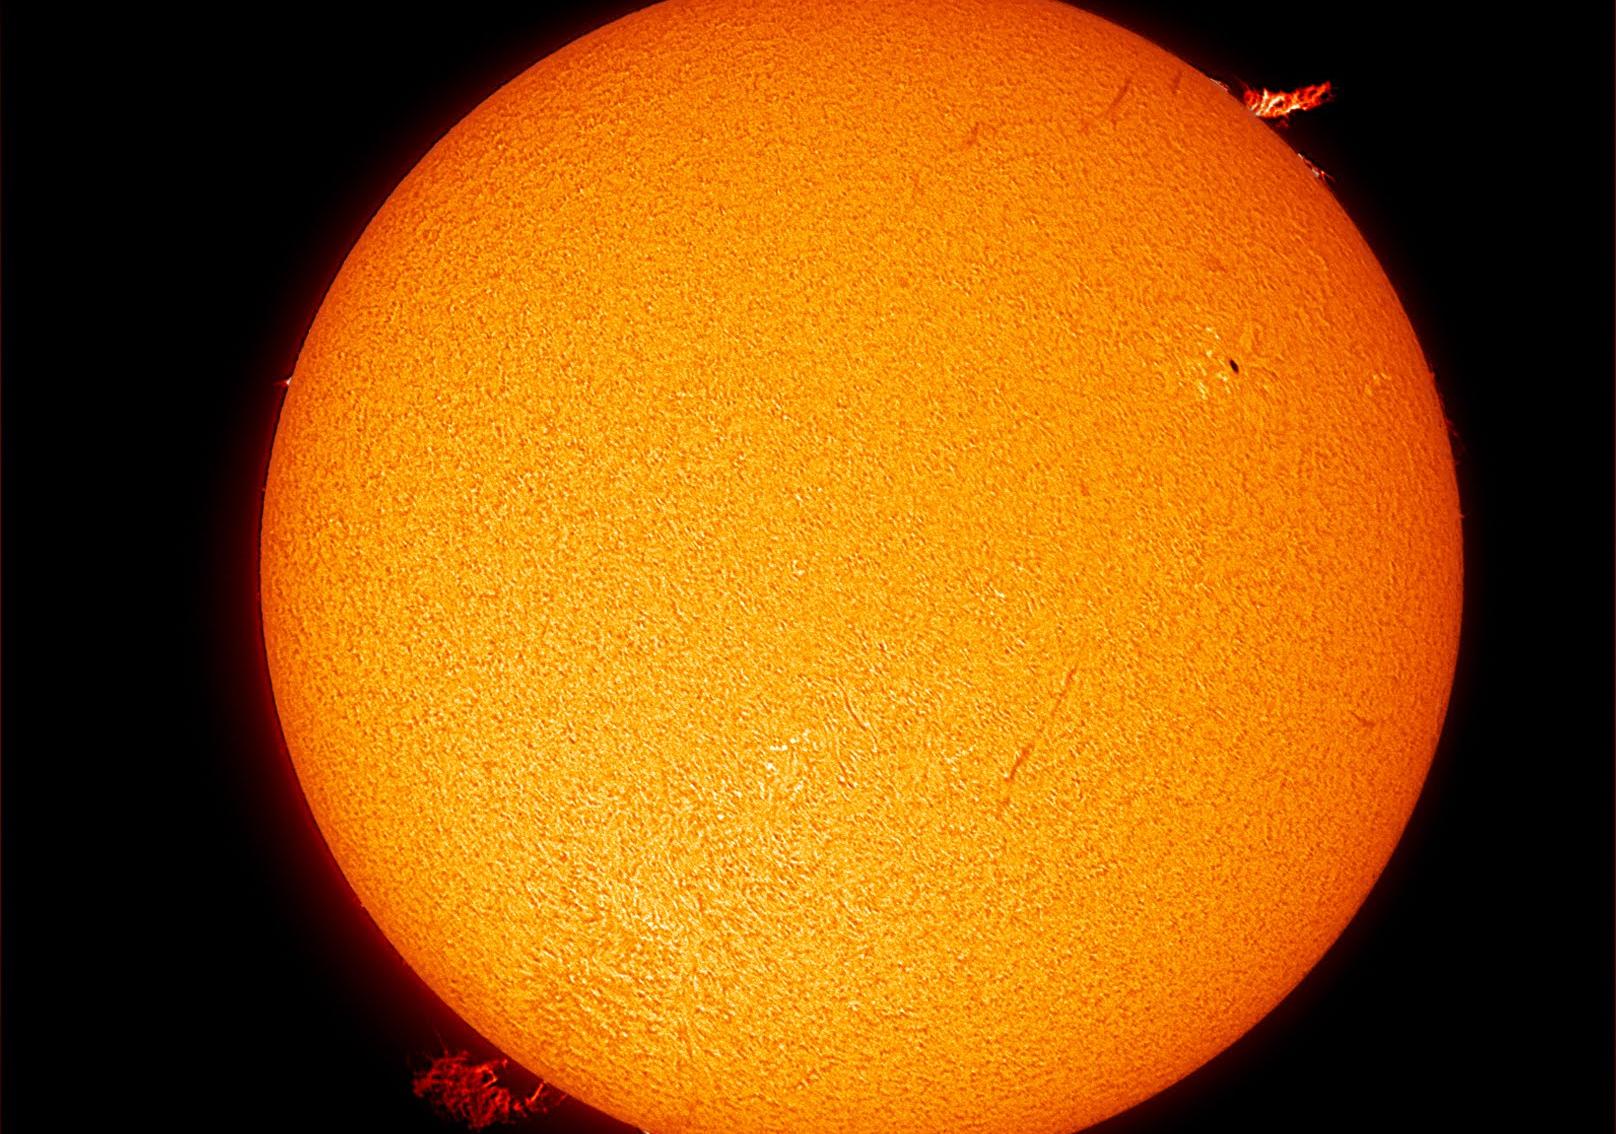 Black and white image of the Sun from the SCSM observatory, with a large sunspot group to the far left.